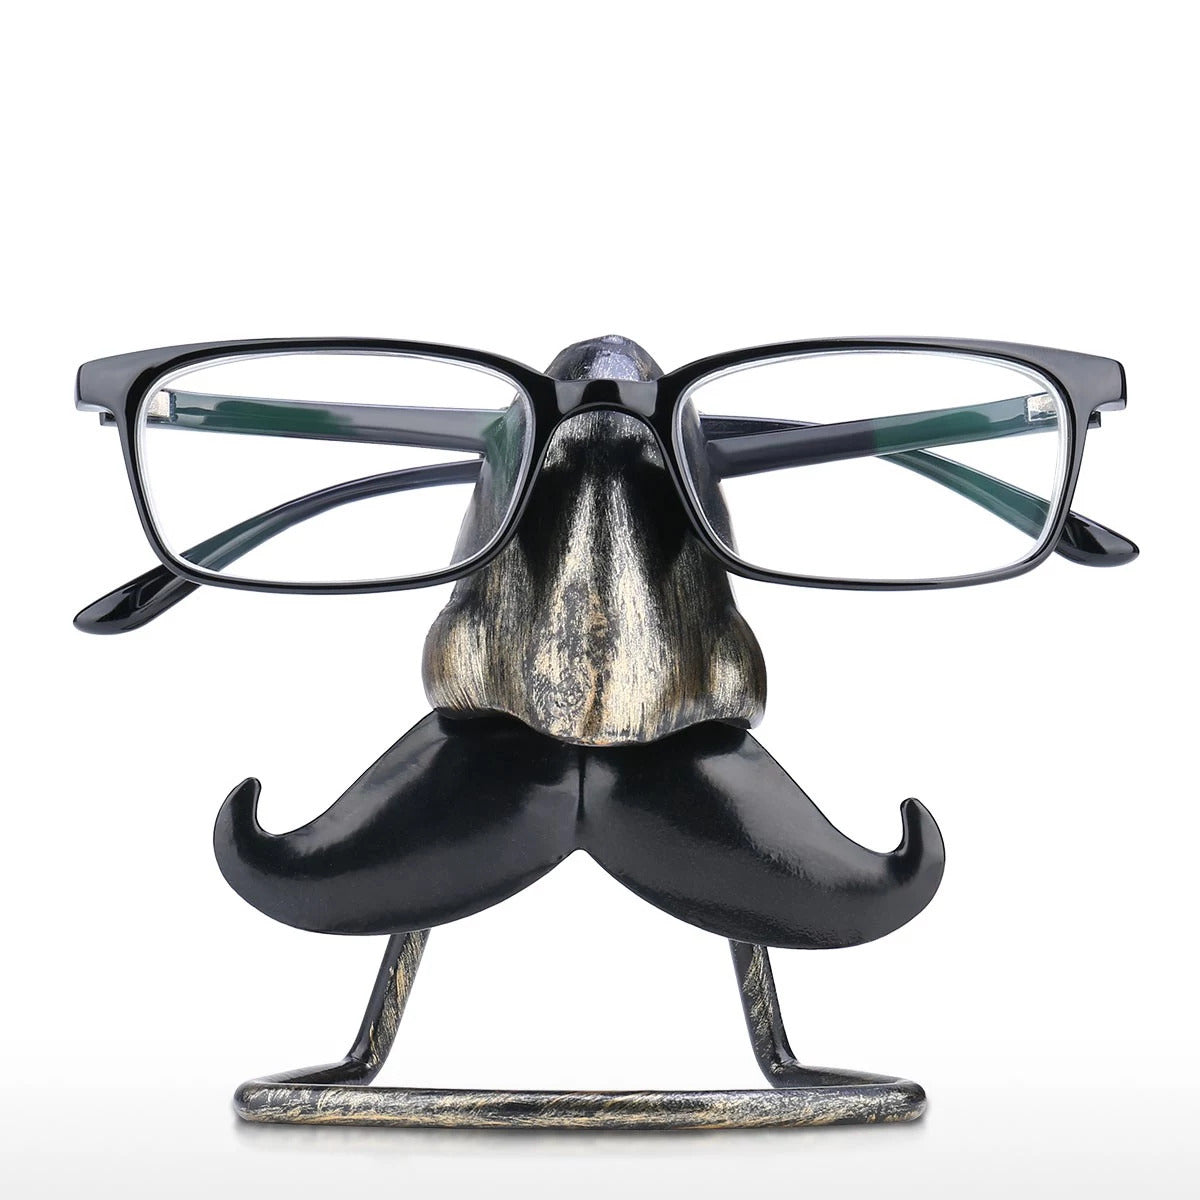 Eyeglass Rack with Bird Nose Figurines Ornament to Desk Organizer and Desktop Accessories in Business or Home Life